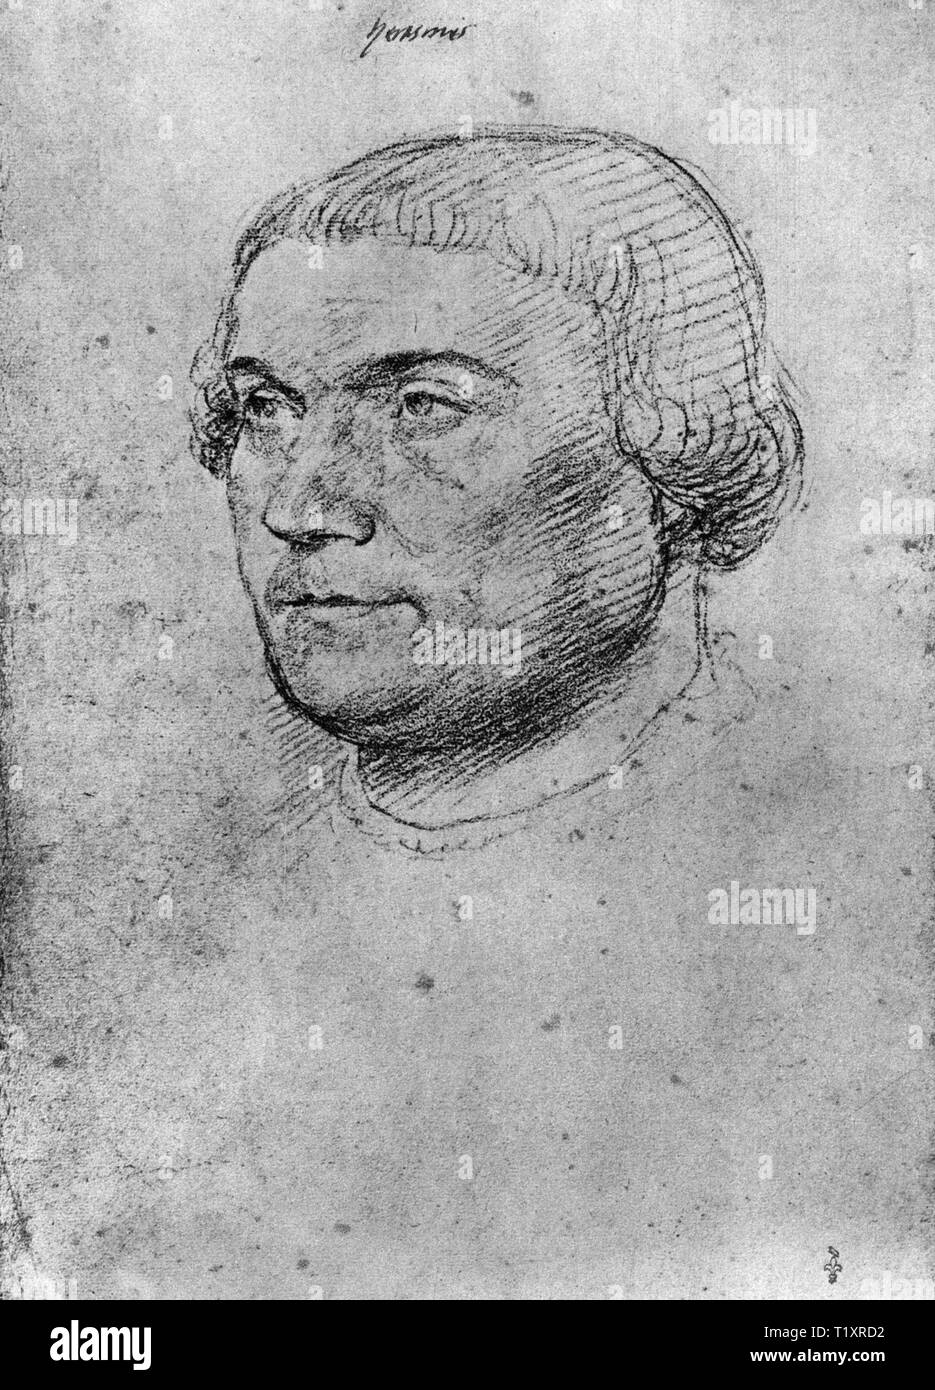 fine arts, Jean Clouet (1480 - 1541), drawing, Desiderius Erasmus of Rotterdam, portrait, 1520, Additional-Rights-Clearance-Info-Not-Available Stock Photo